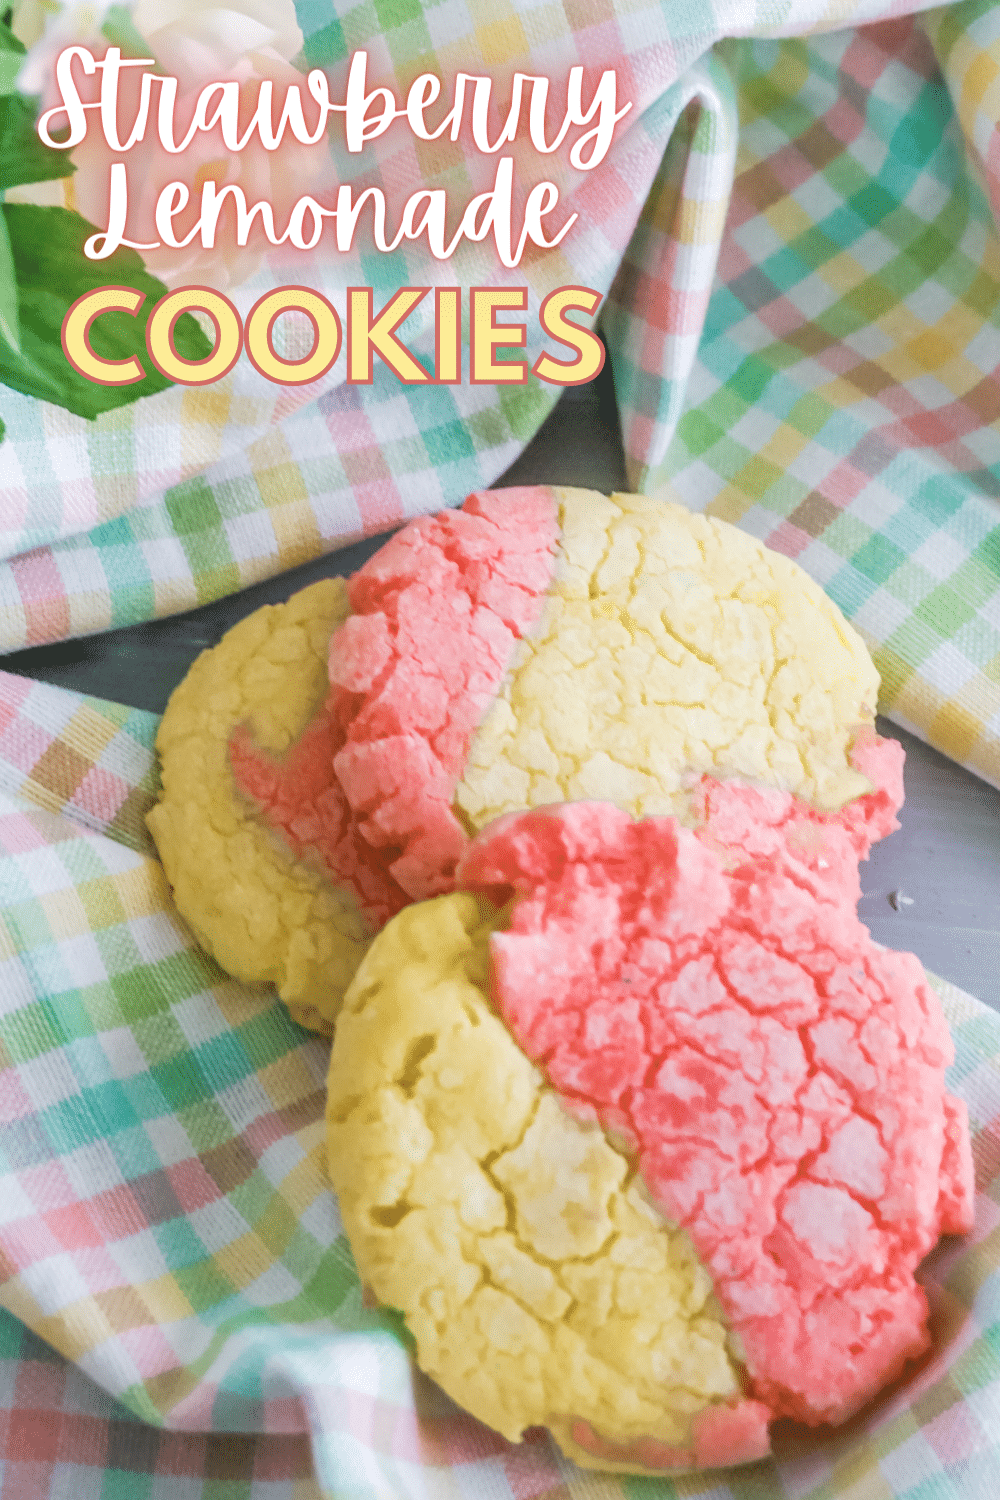 Strawberry Lemonade Crinkle Cookies are the cookies that you need in your life. The two-toned cookies are beautiful to look at! #crinklecookies #cookies #strawberrylemonade #recipe via @wondermomwannab